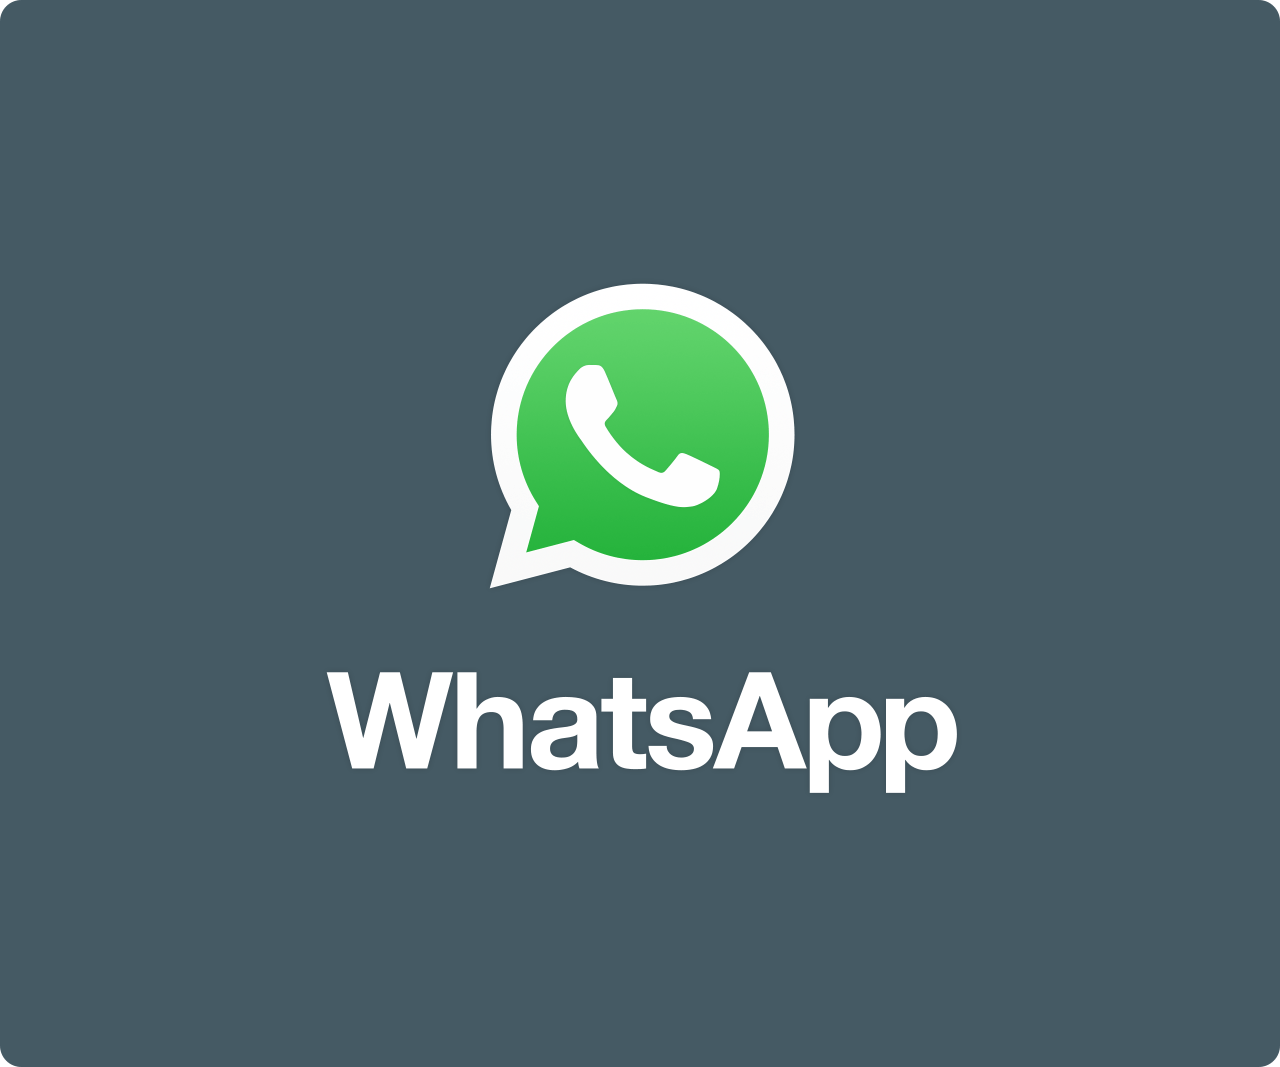 Official Logo - WhatsApp Brand Resources